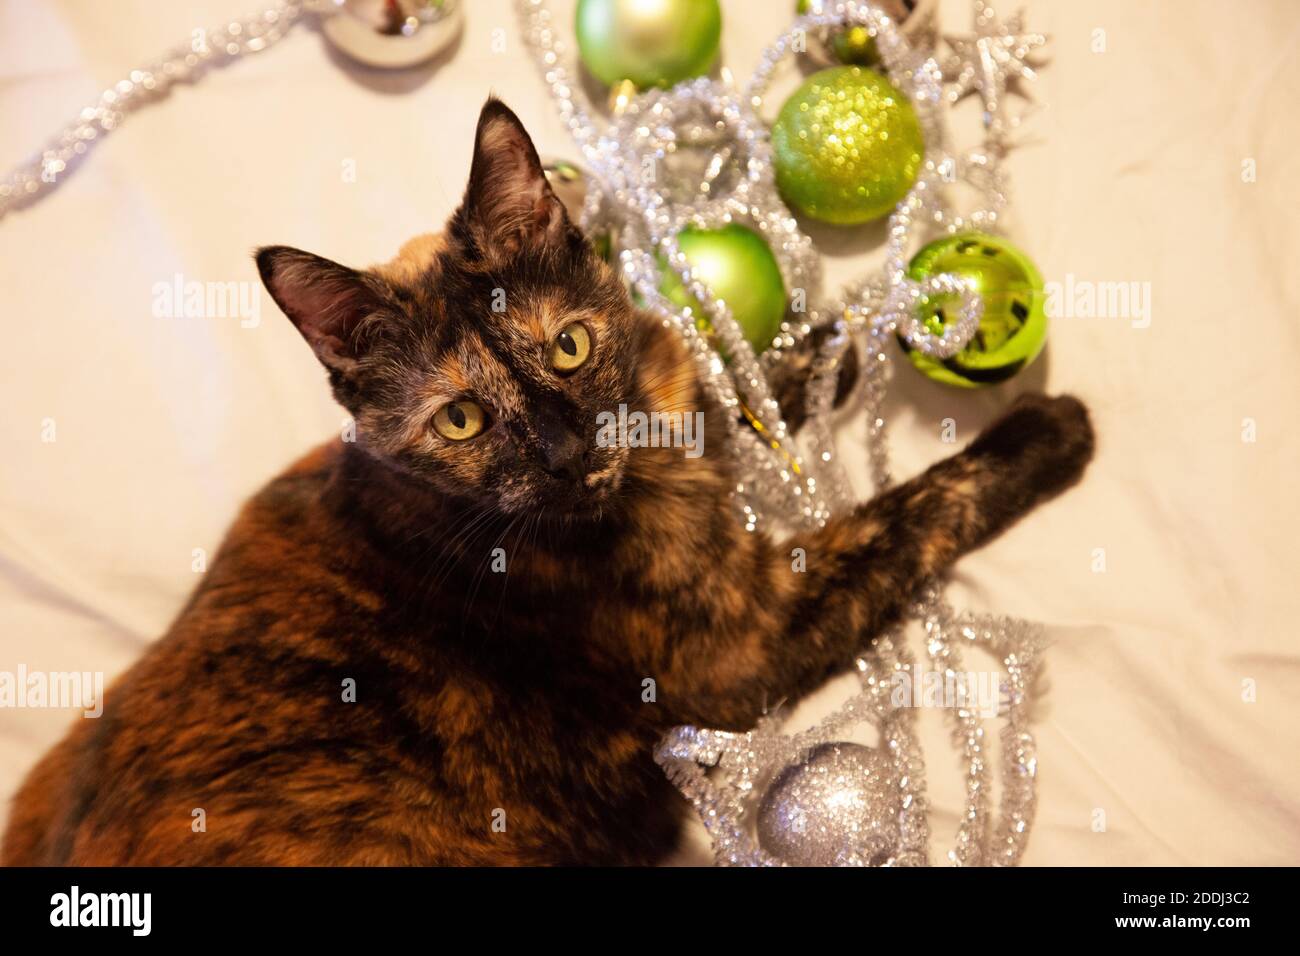 pretty kitty caught playing among holiday ornaments and silver strings Stock Photo